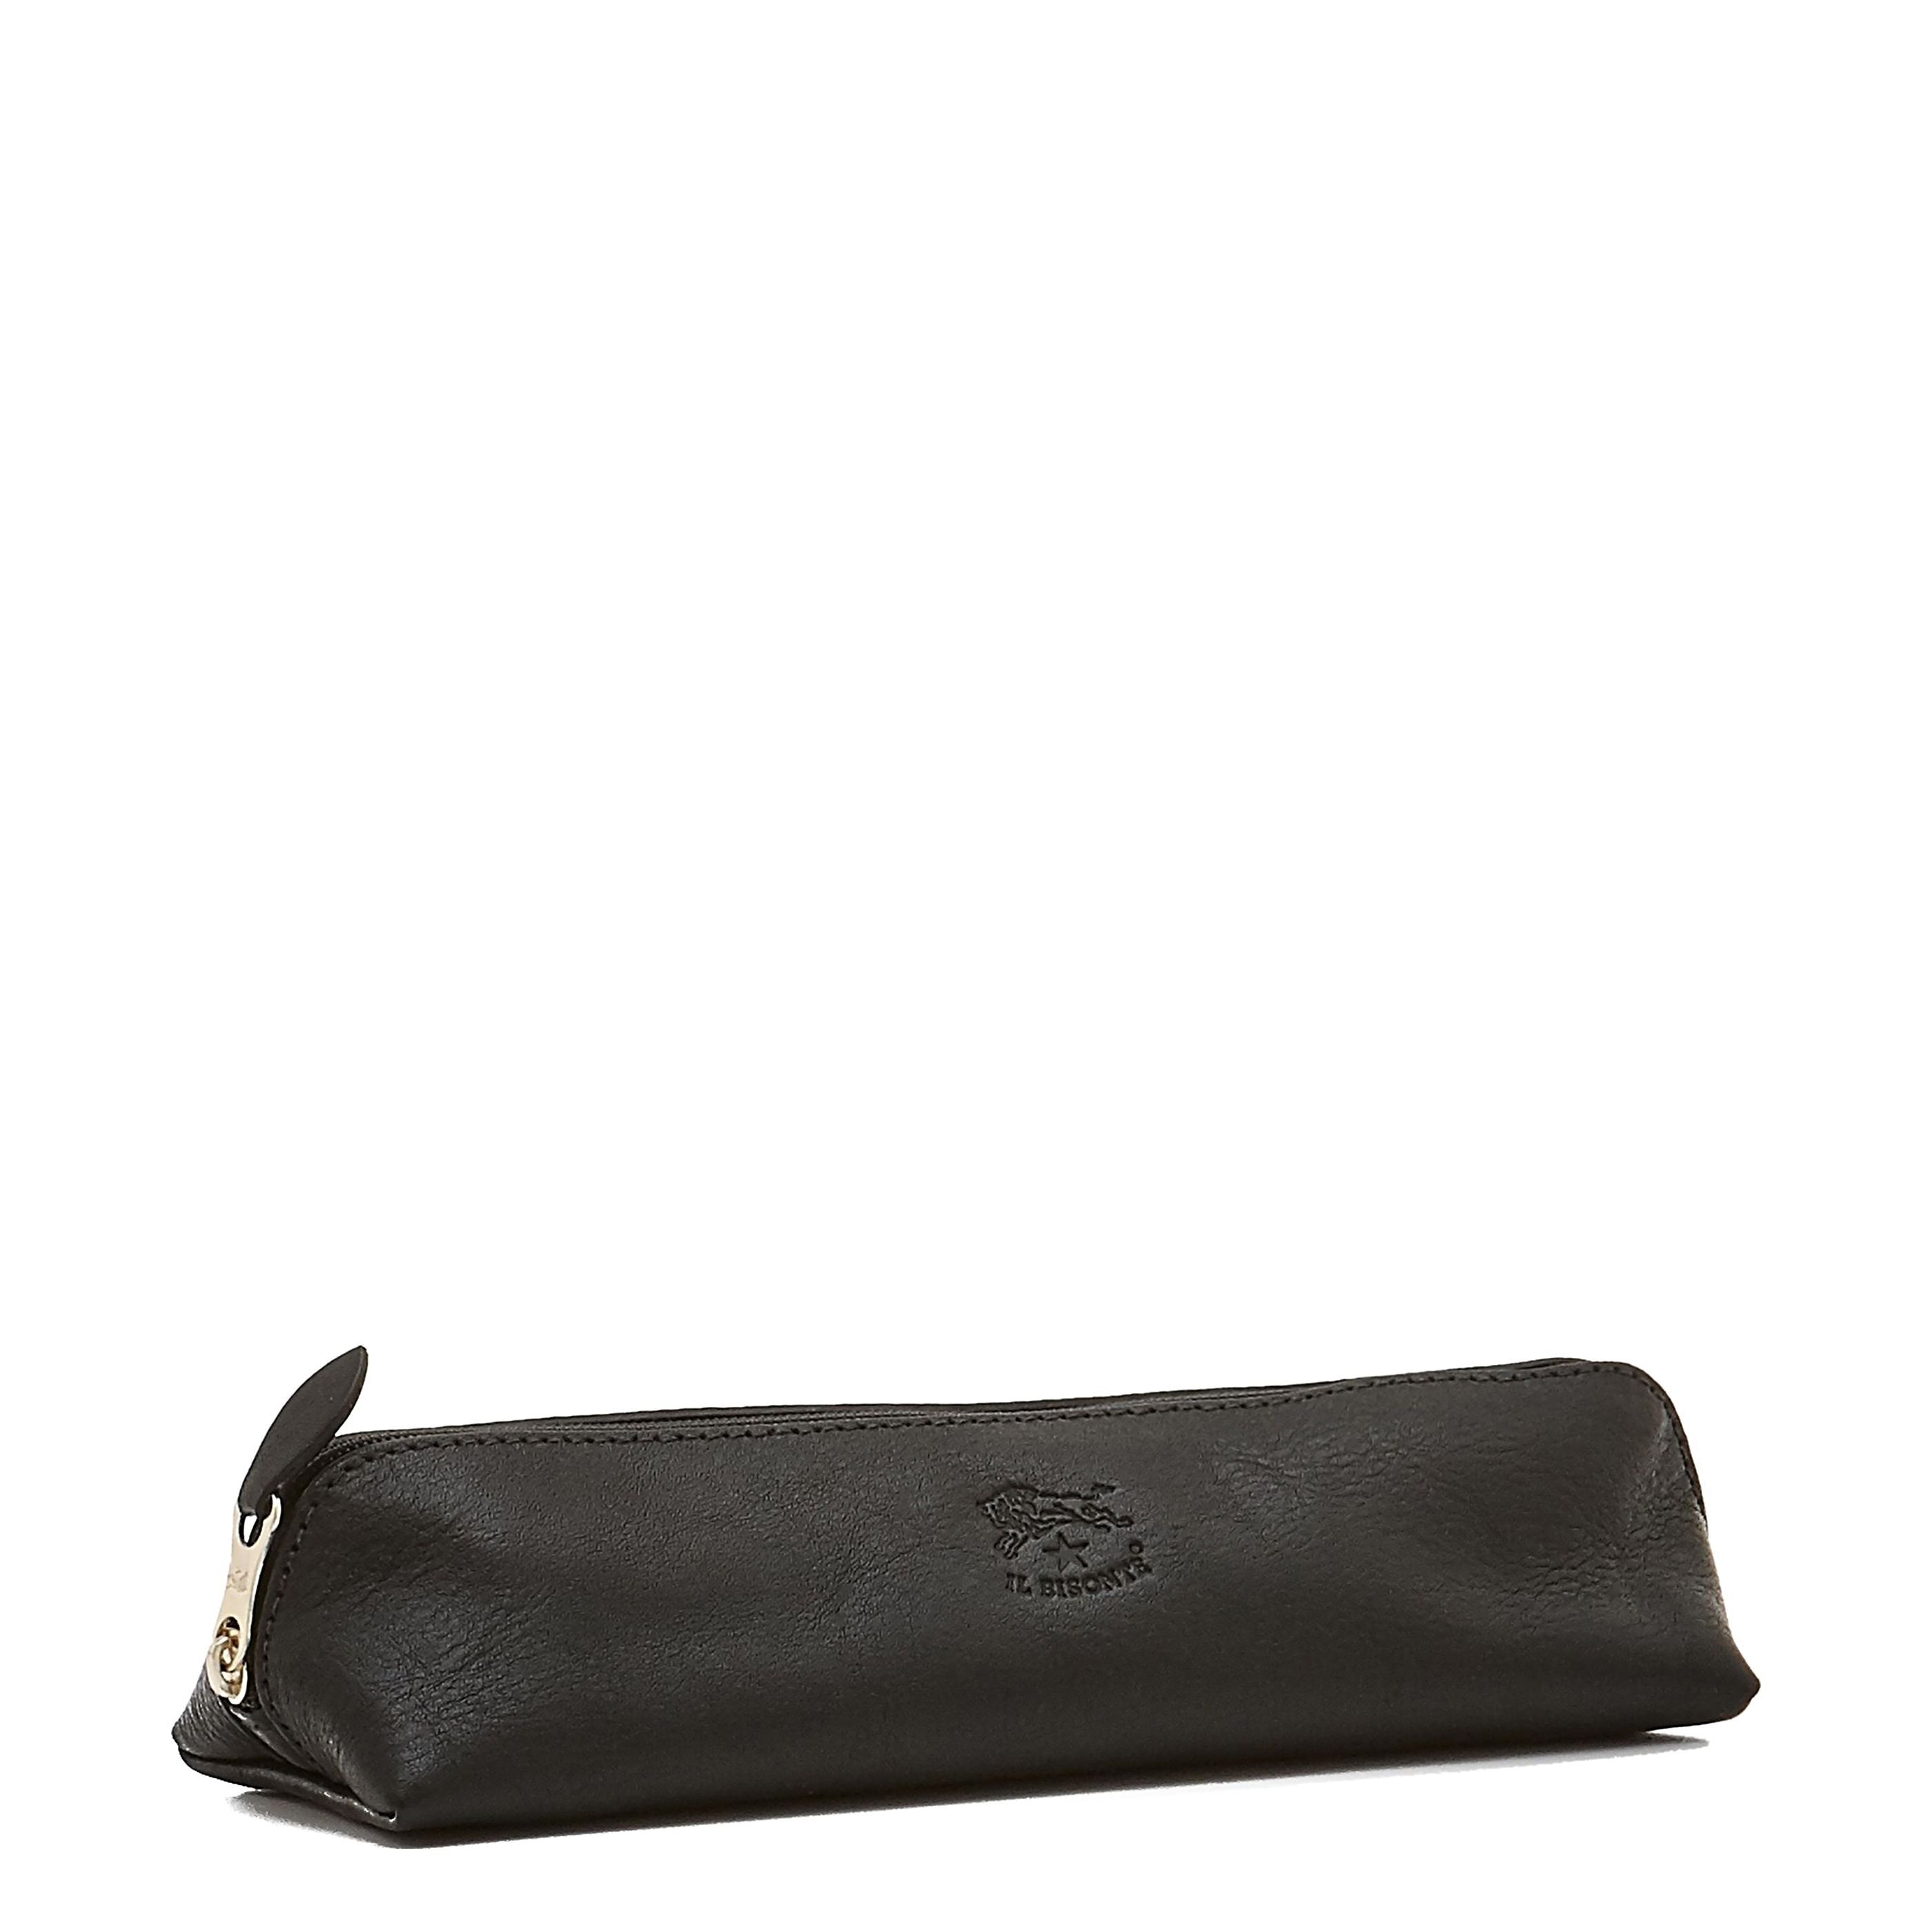 Women's case in calf leather color black